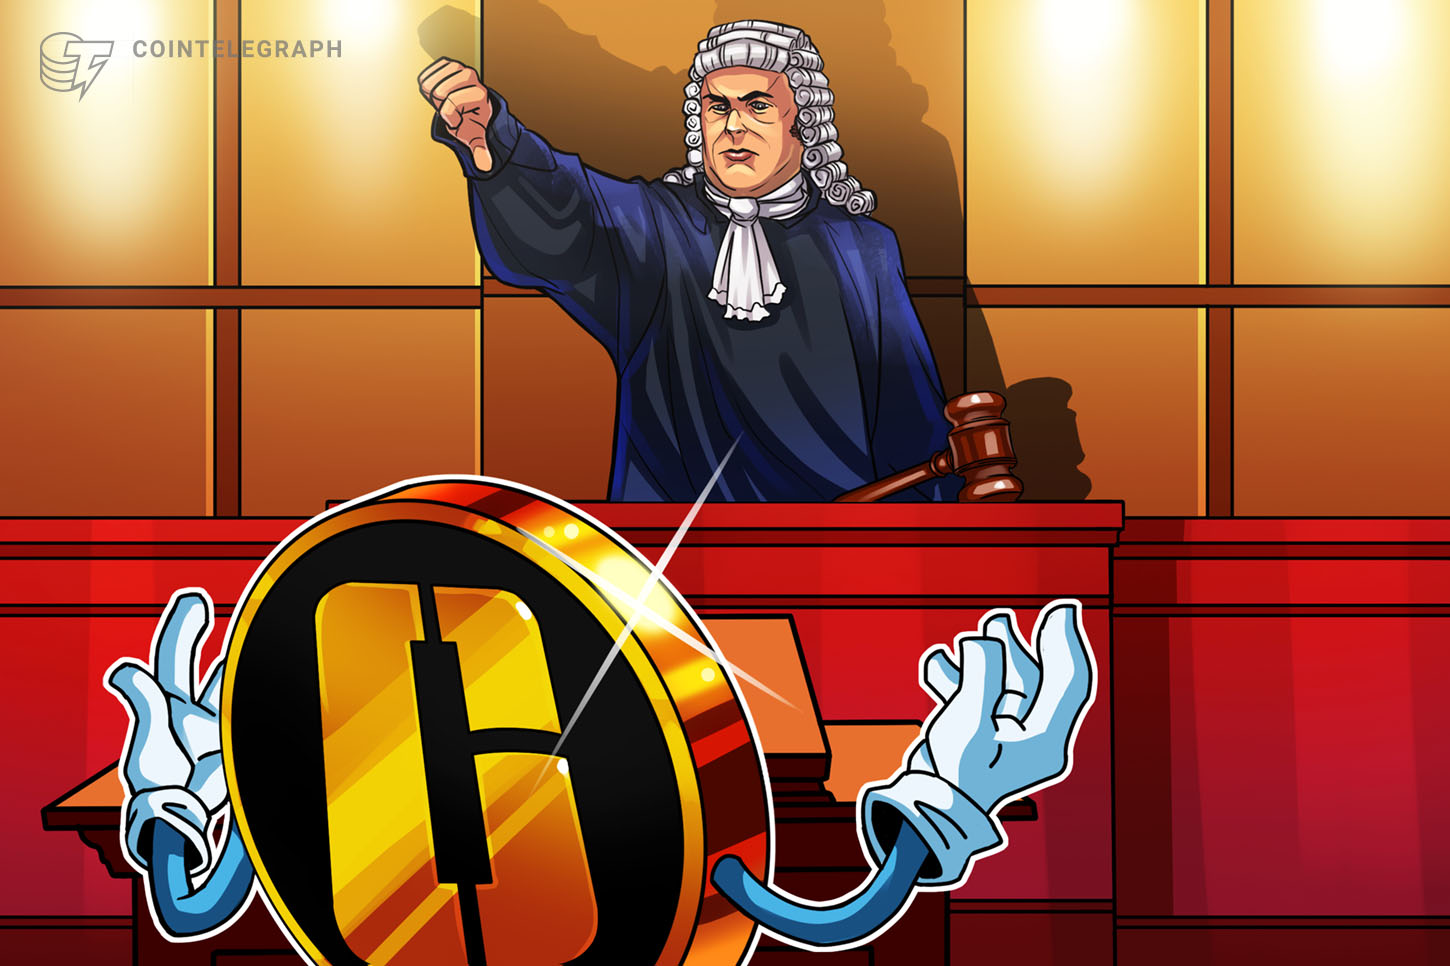 OneCoin Advertising Rip-off Operator Fined $72,000 in Singapore